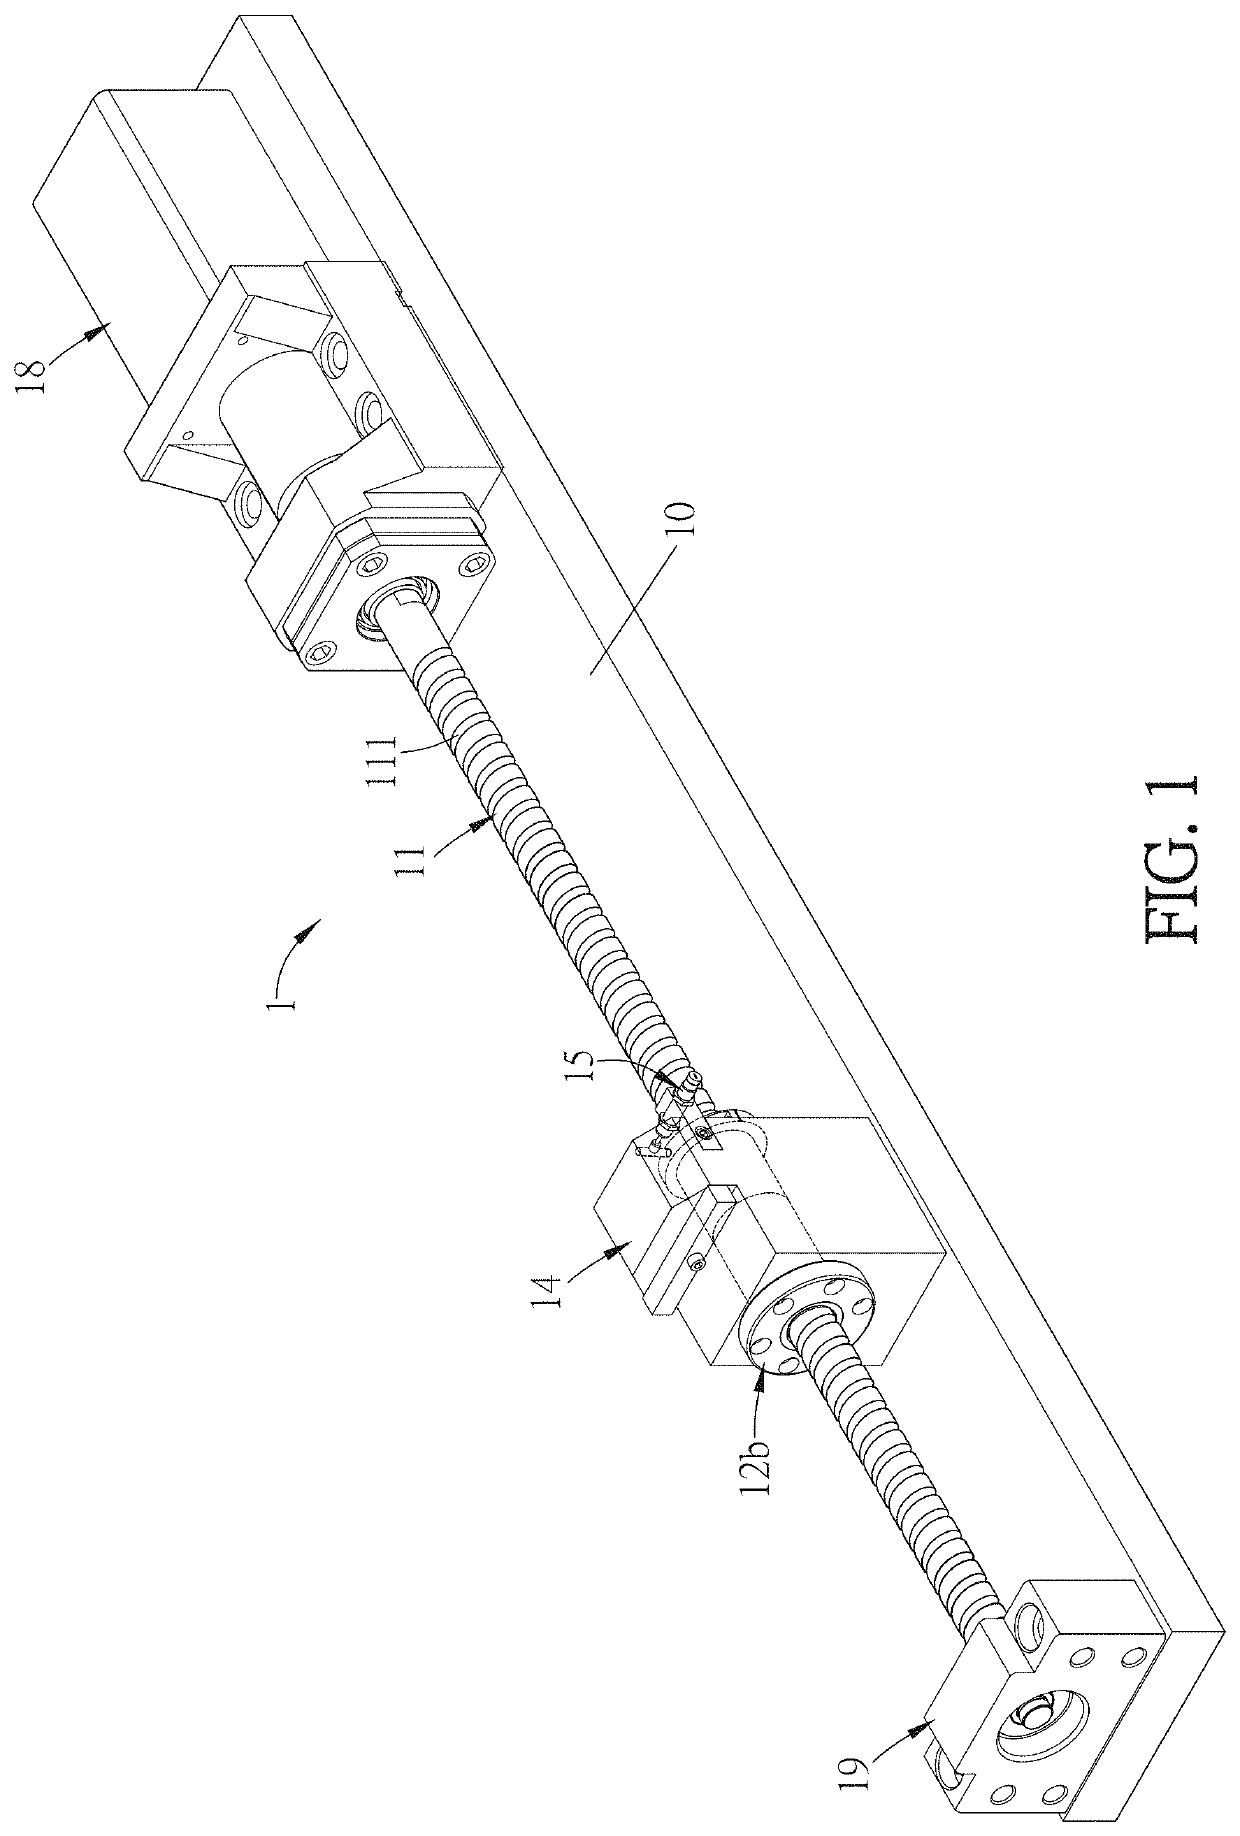 Linear motion system